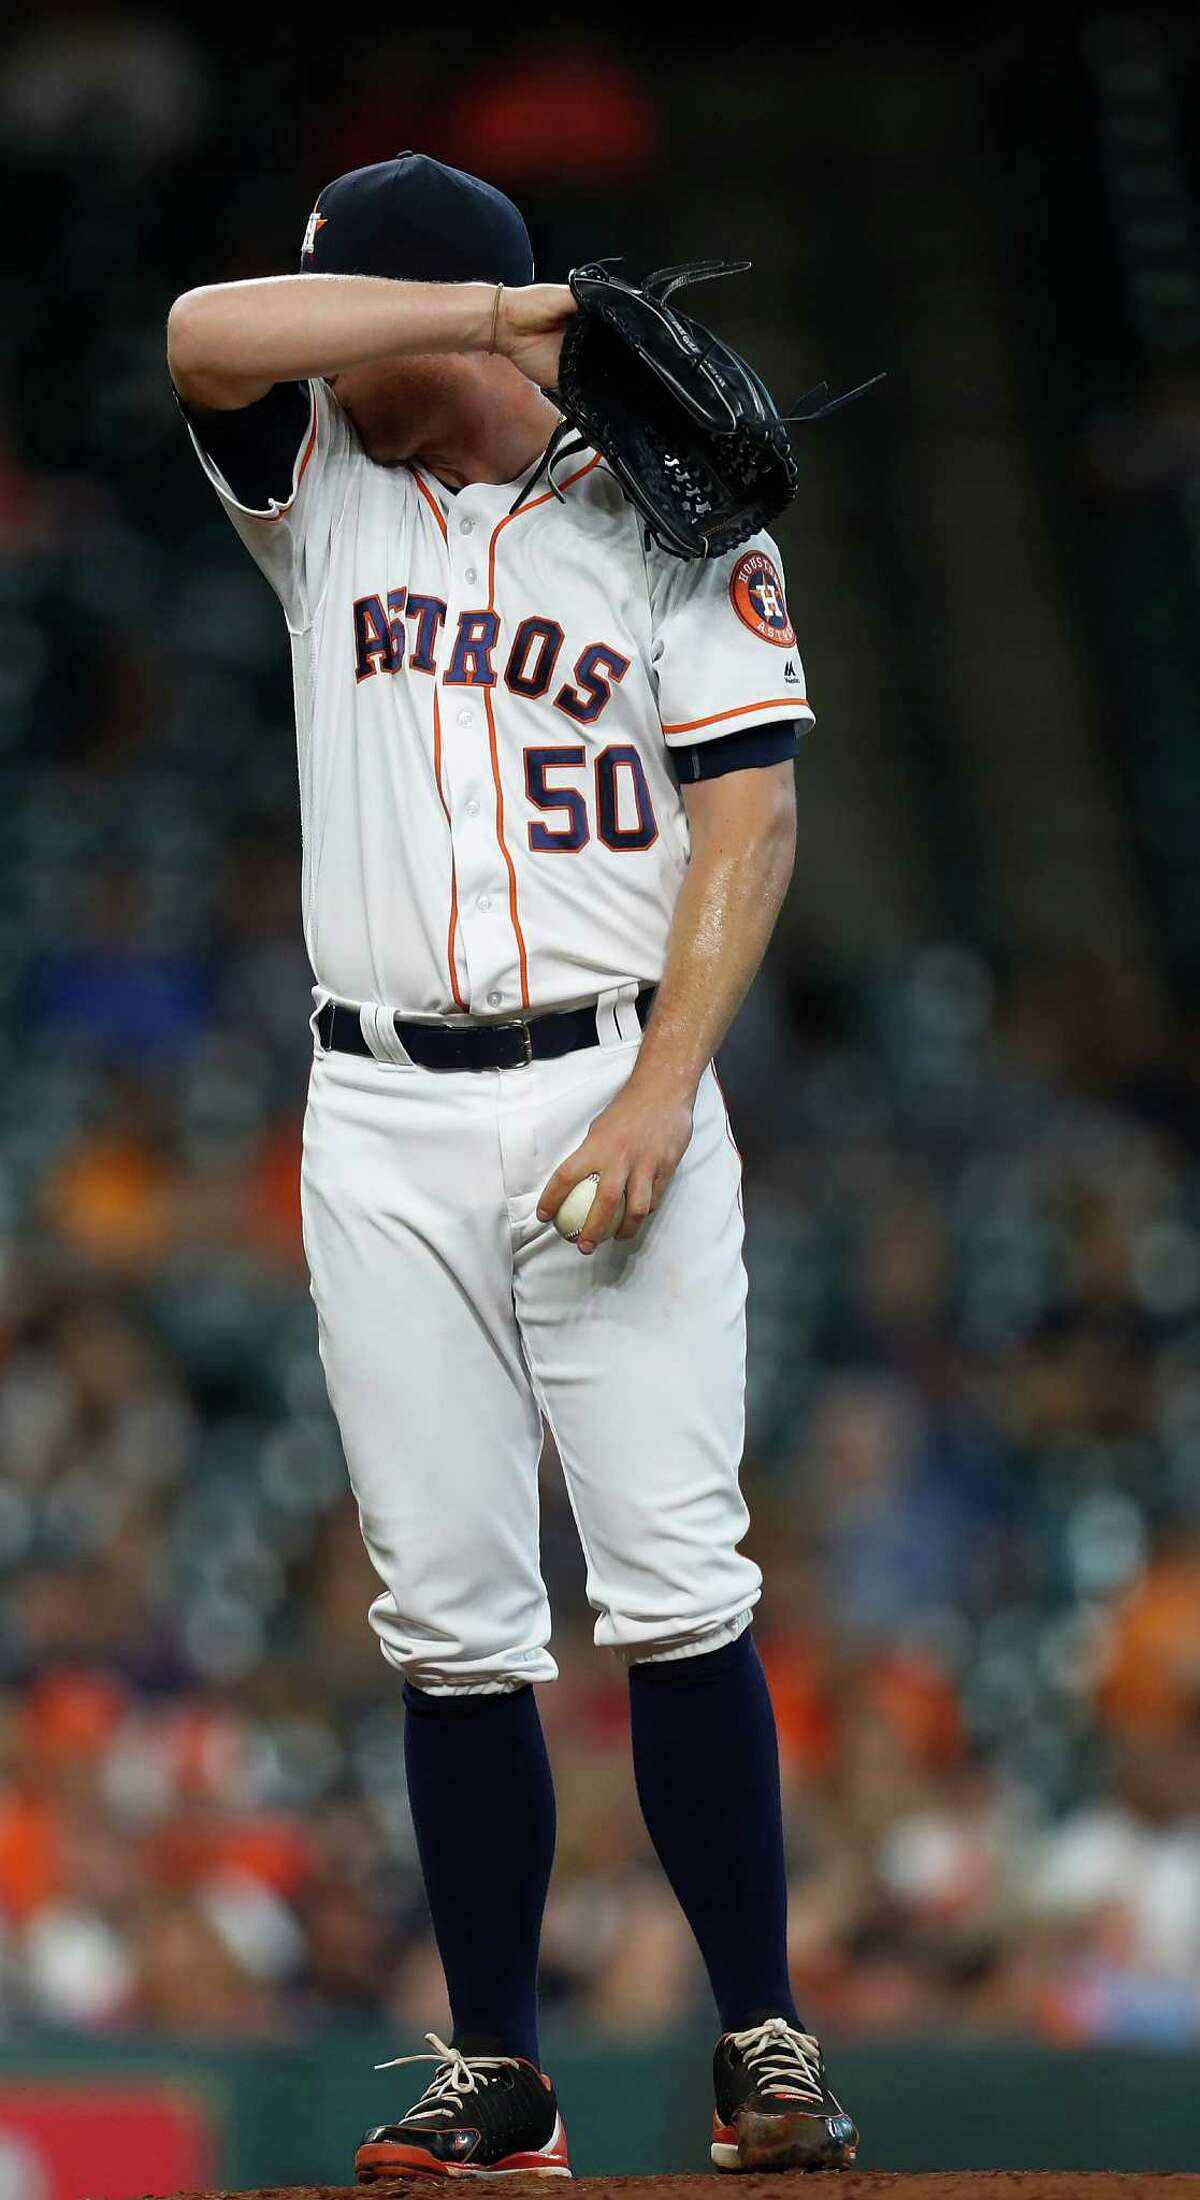 Houston Astros relief pitcher Kevin Chapman (50) wipes his face after giving up a run during the third inning of an MLB game at Minute Maid Park, Wednesday, Sept. 28, 2016 in Houston.